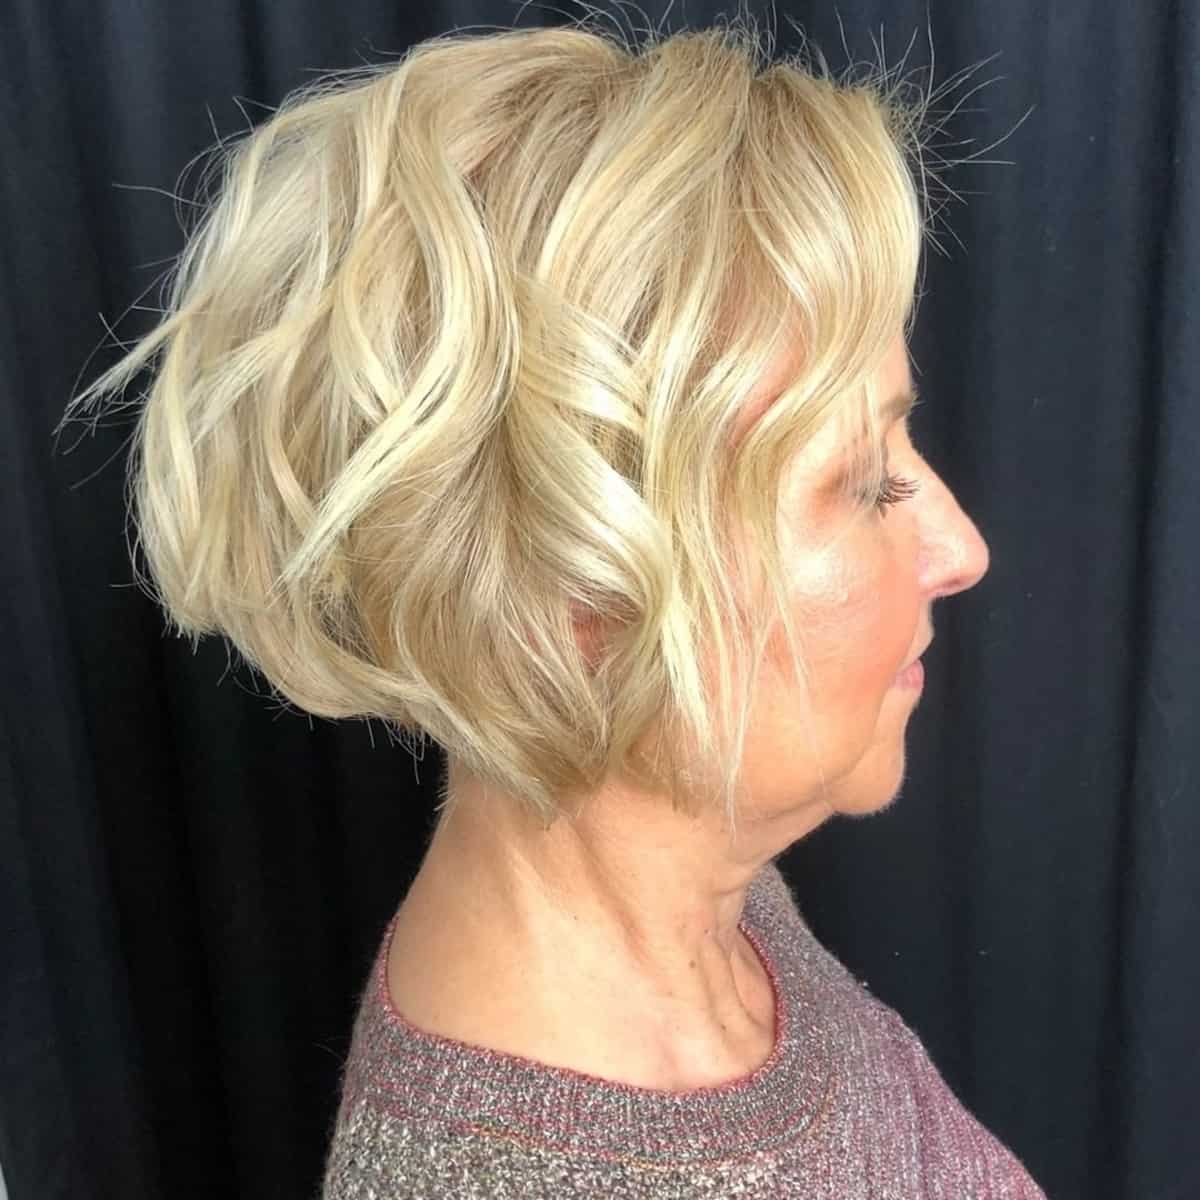 25 Short Shaggy Haircuts Women In Their 60s Can Totally Pull Off